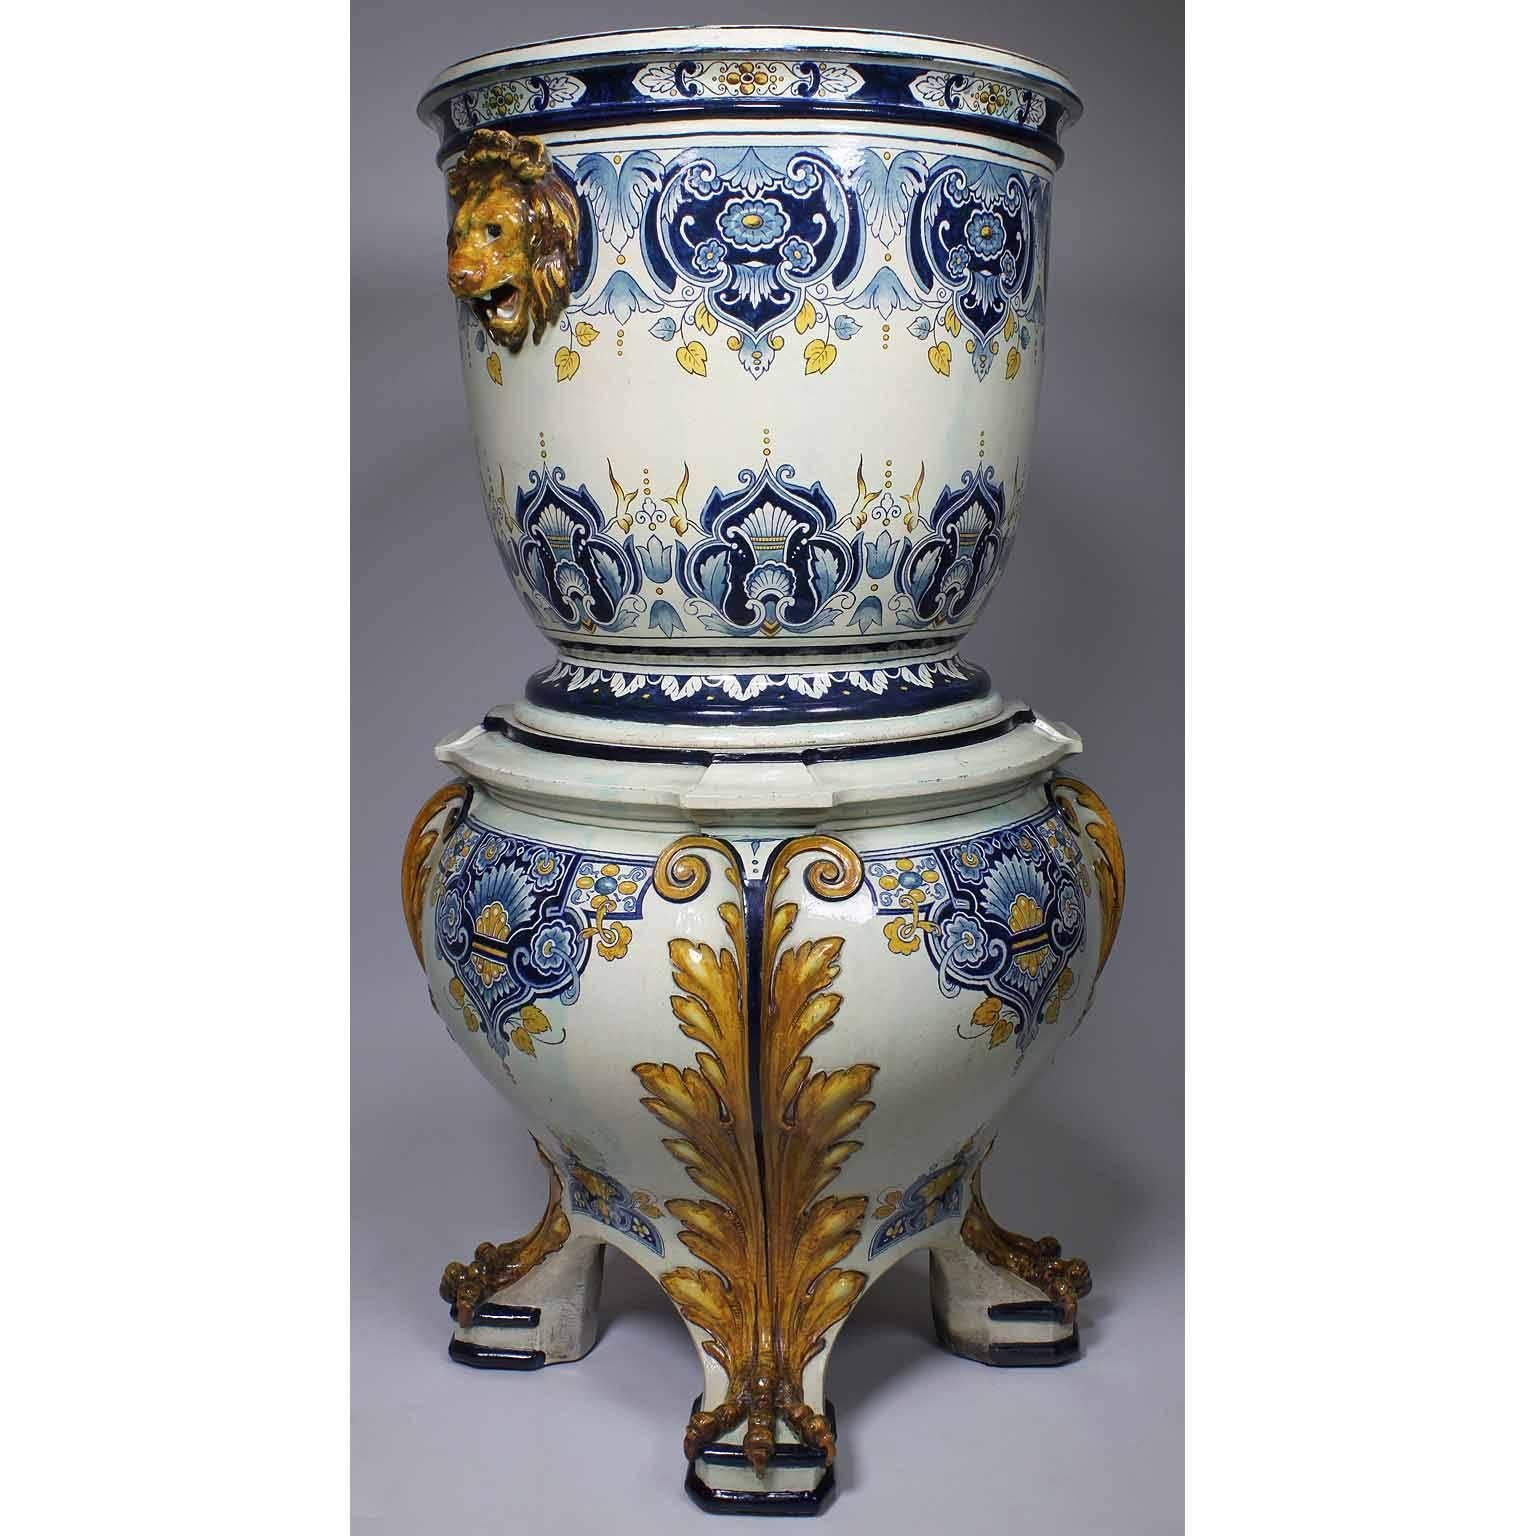 German 19th Century Neoclassical Revival Majolica Jardinière Planter on Stand 1